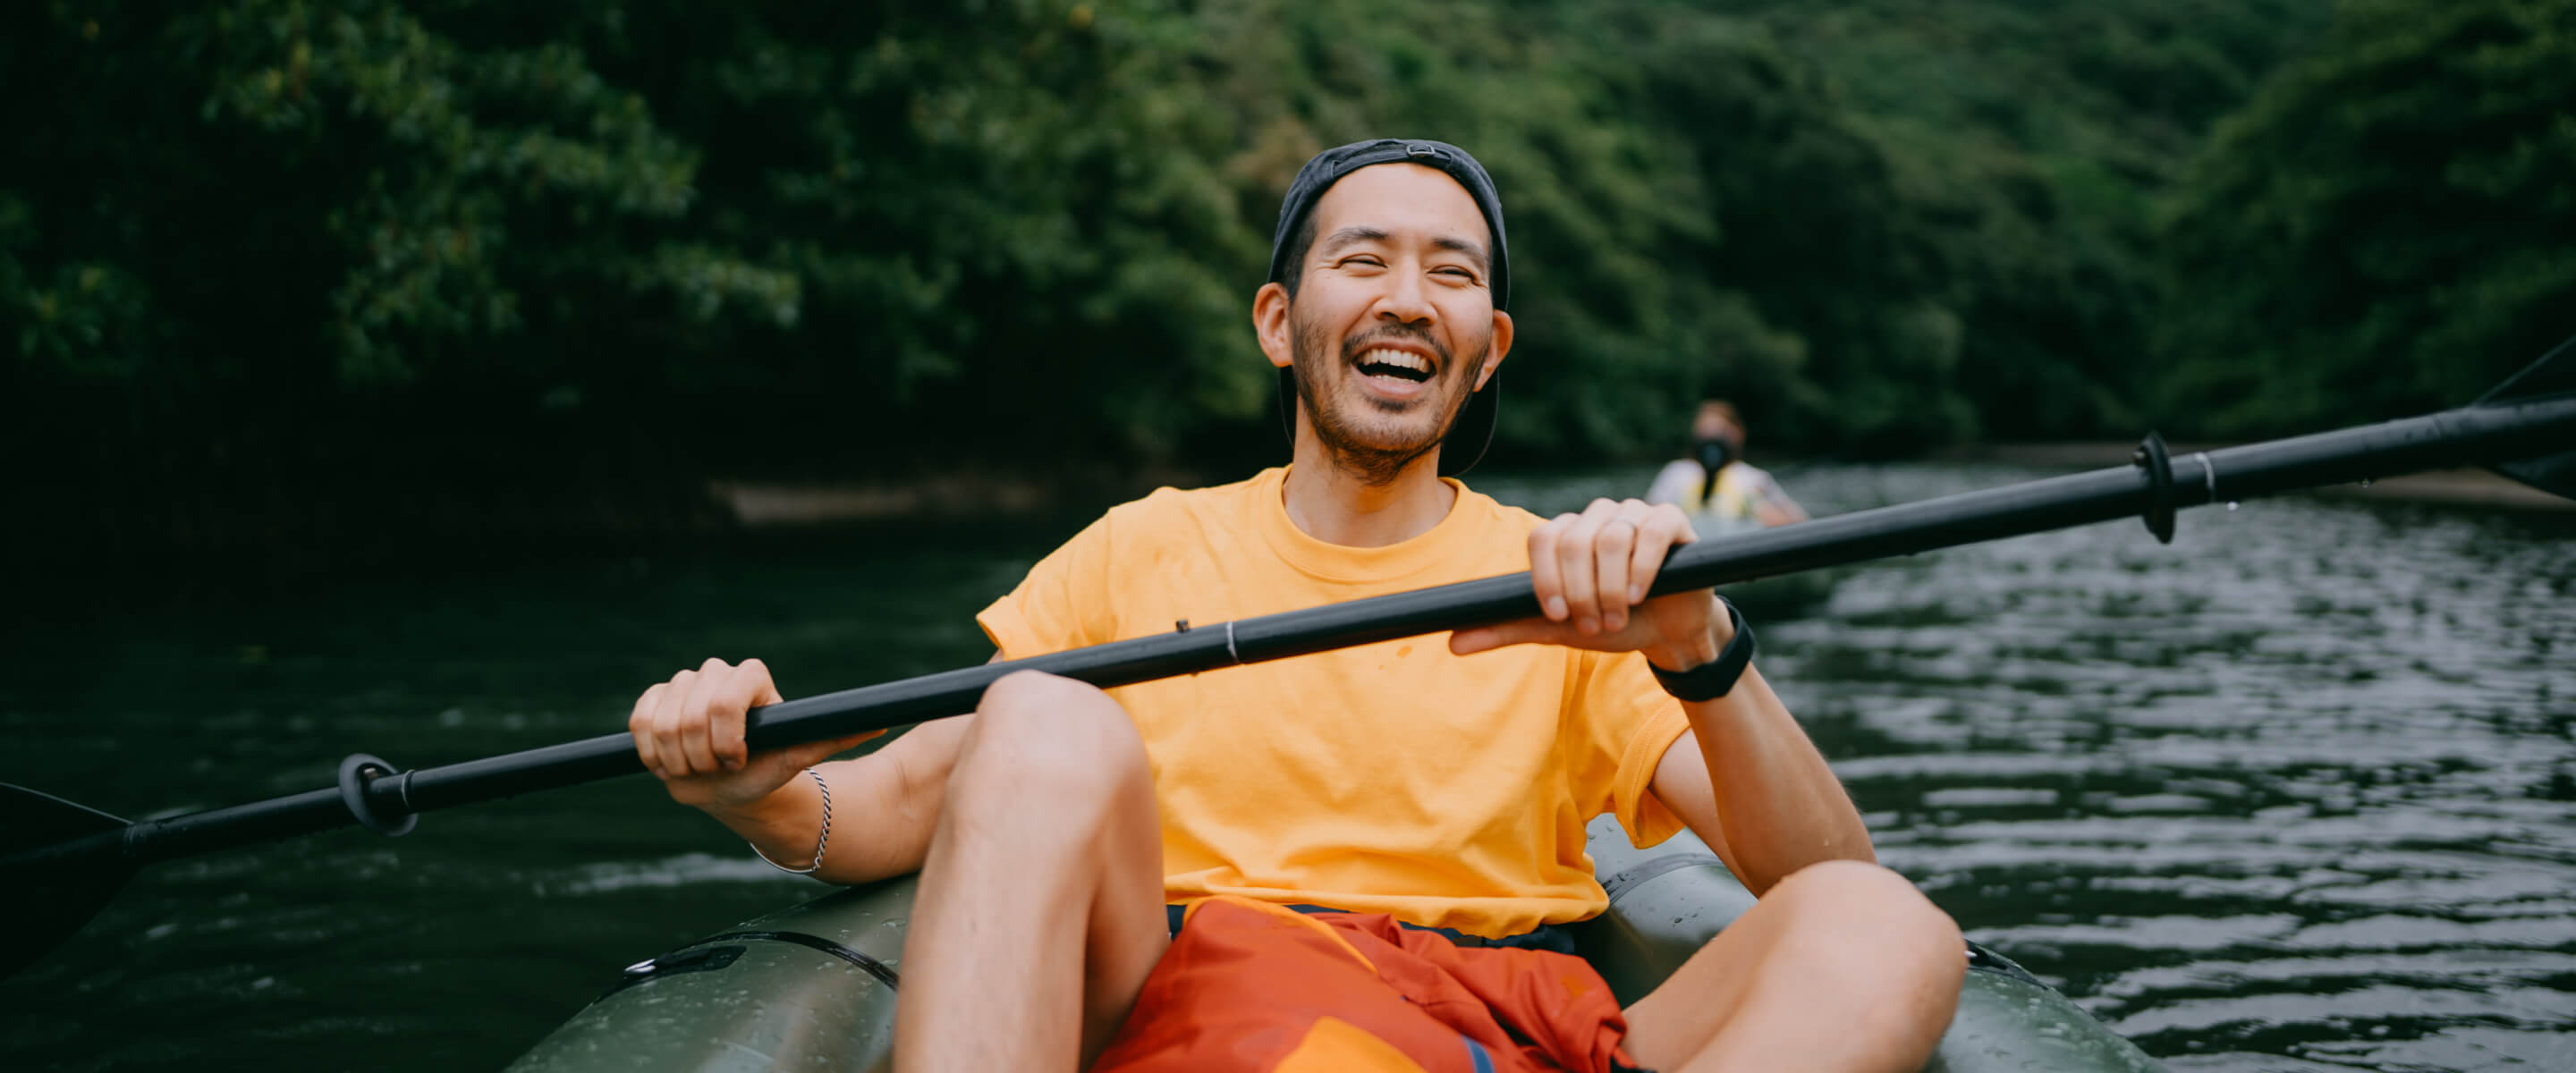 A man wearing an orange t-shirt smiling on a kayak holding a paddle on water.